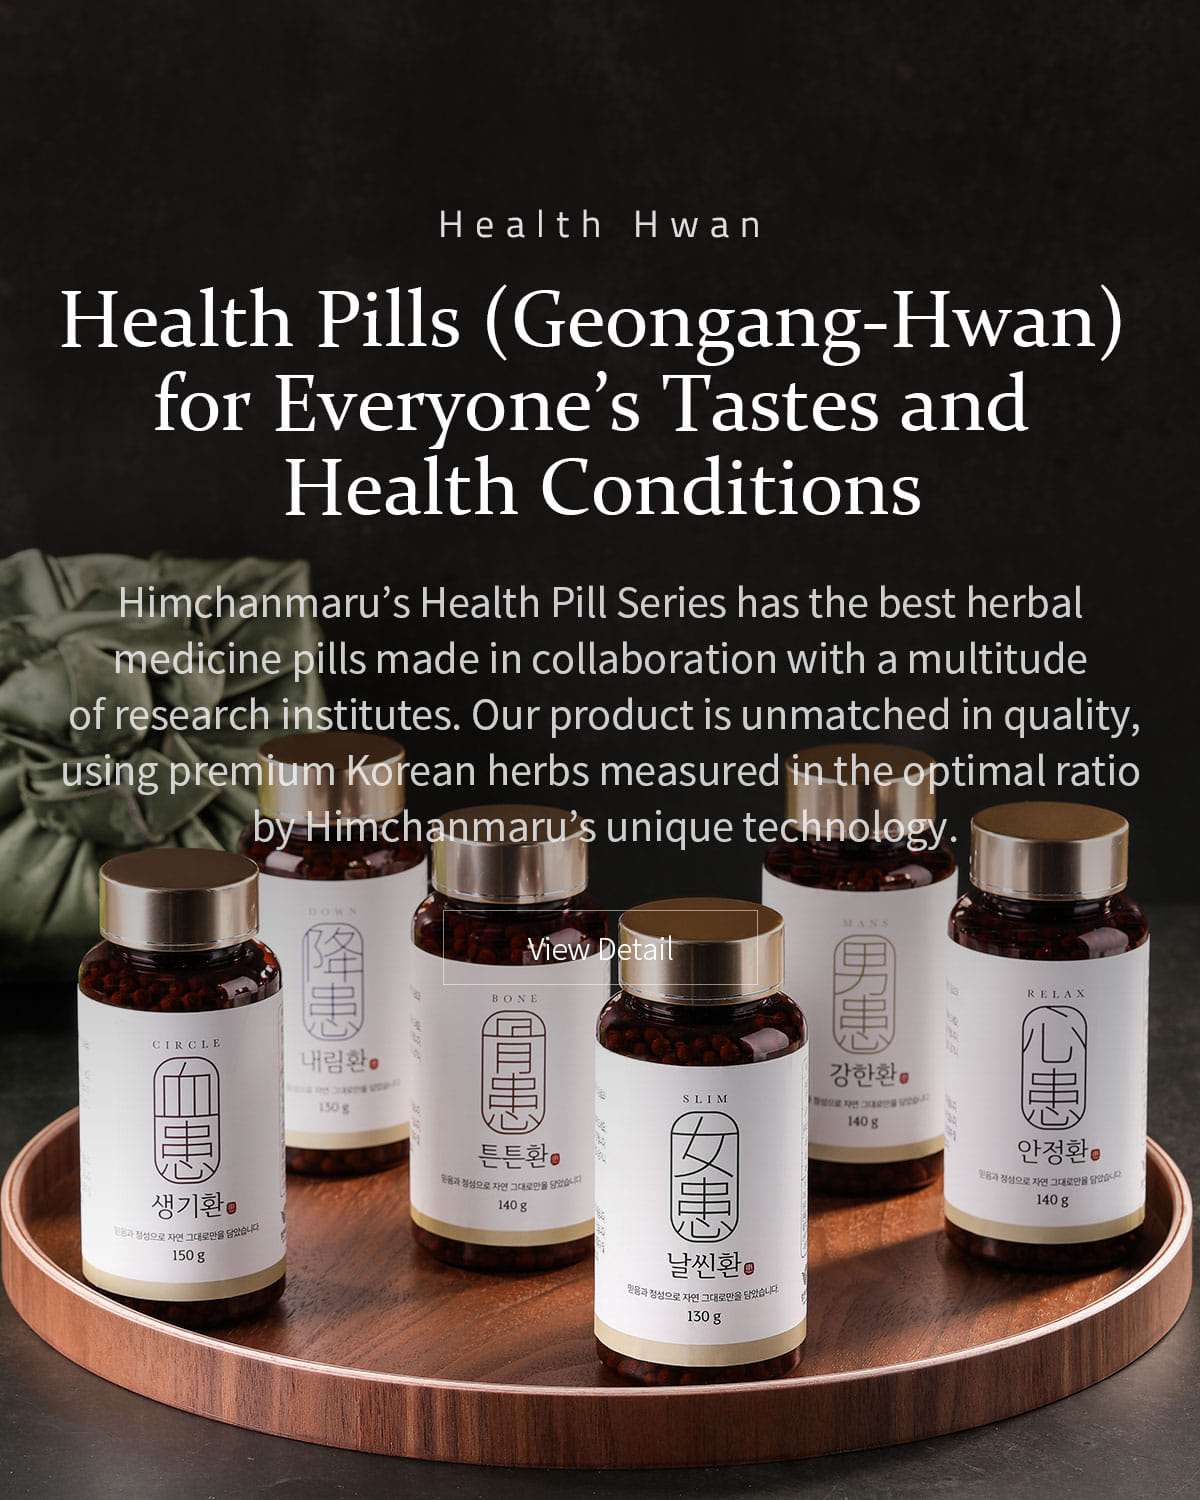 Health Pills (Geongang-Hwan) for Everyone’s Tastes and Health Conditions.